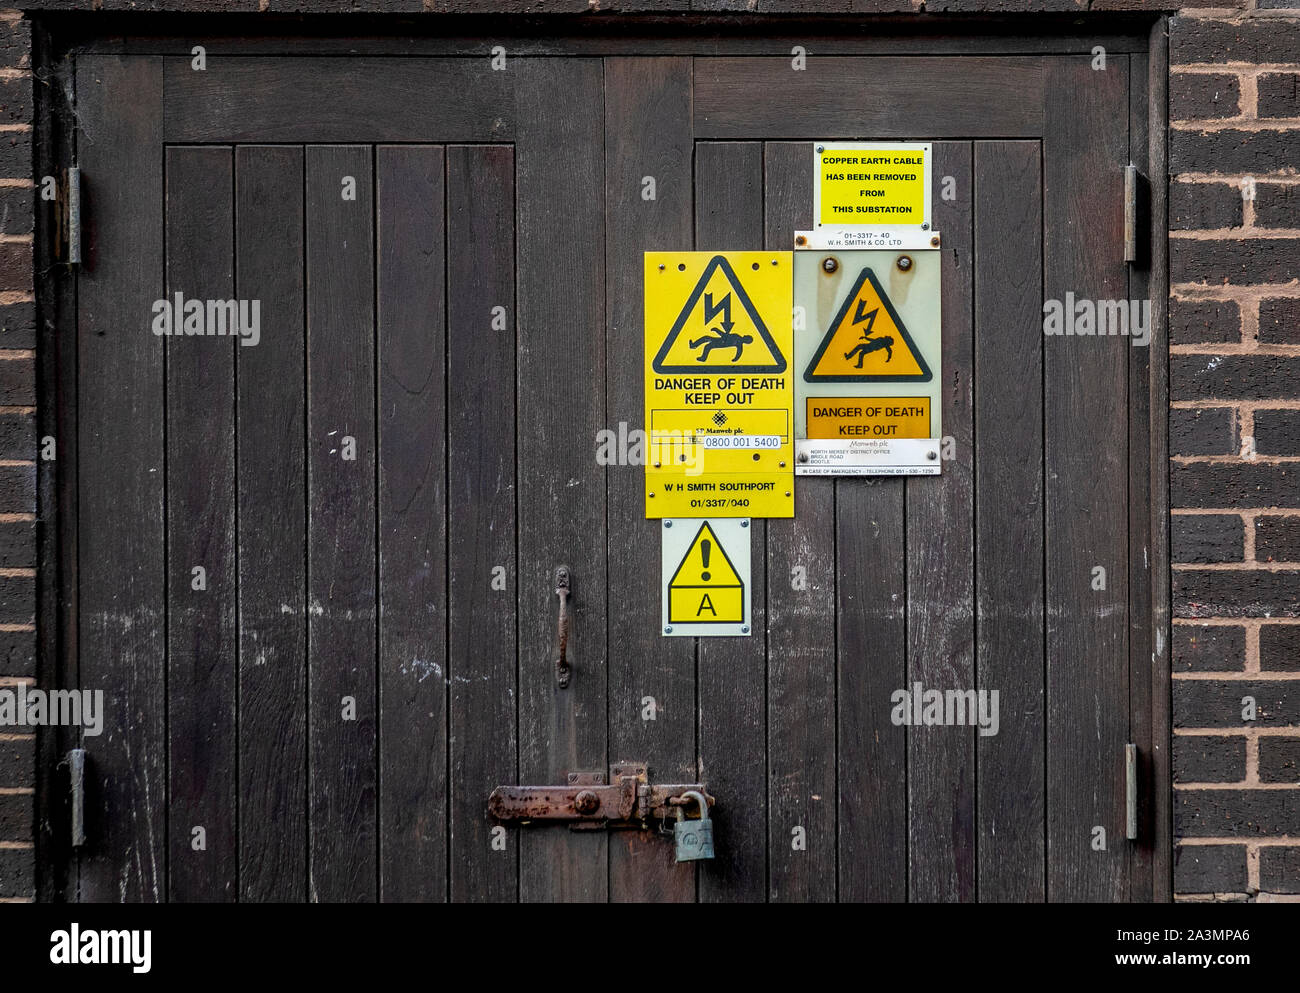 Workplace safety: caution Danger of Death triangular warning signs on town centre substation; Copper earth cable has been removed from this electricty substation, Southport, UK Stock Photo